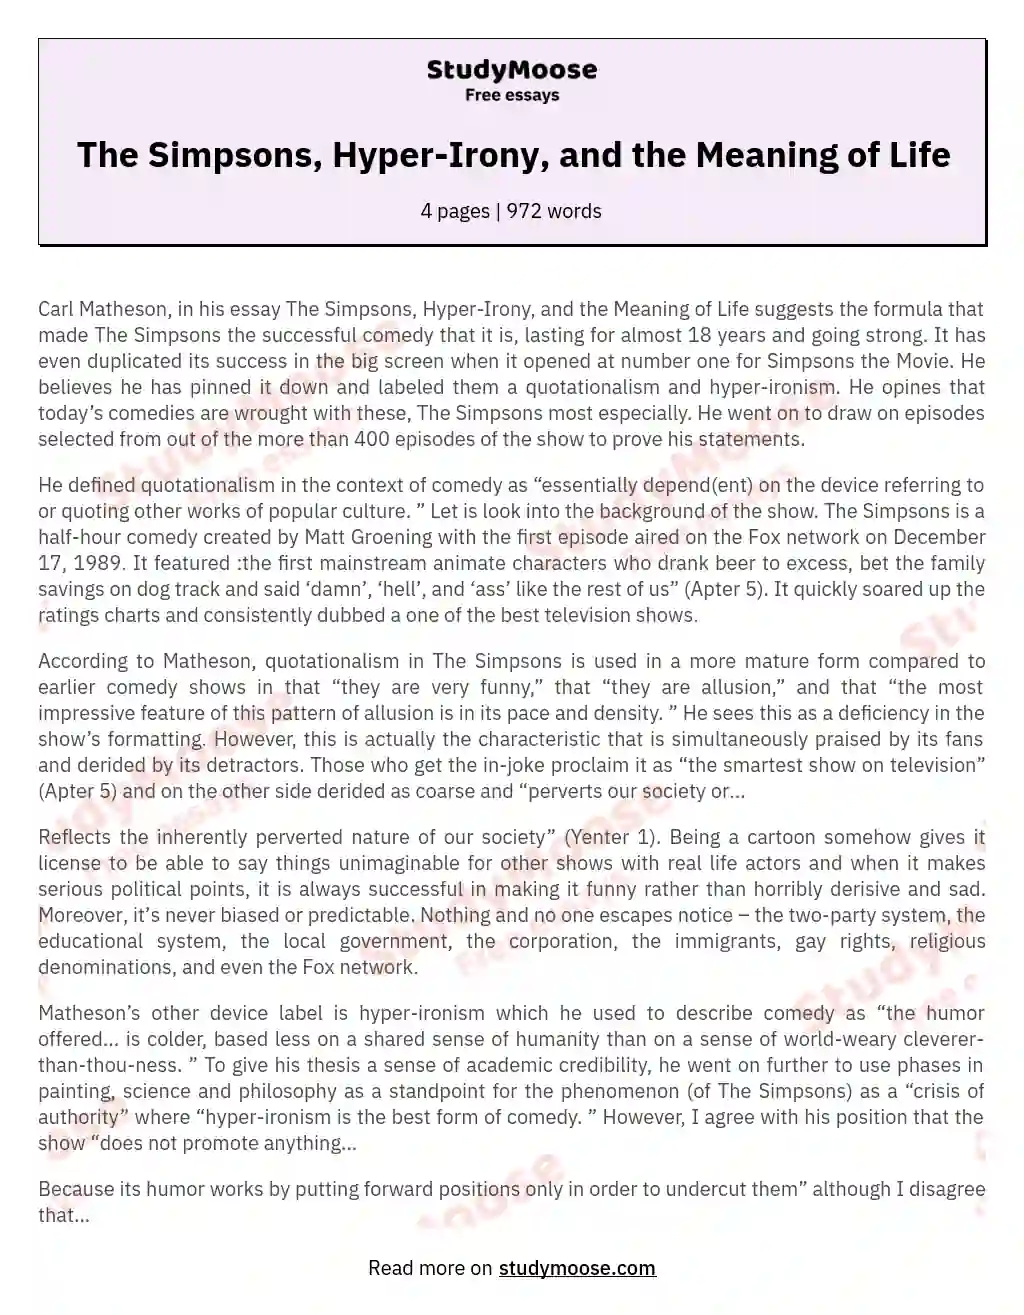 The Simpsons, Hyper-Irony, and the Meaning of Life essay